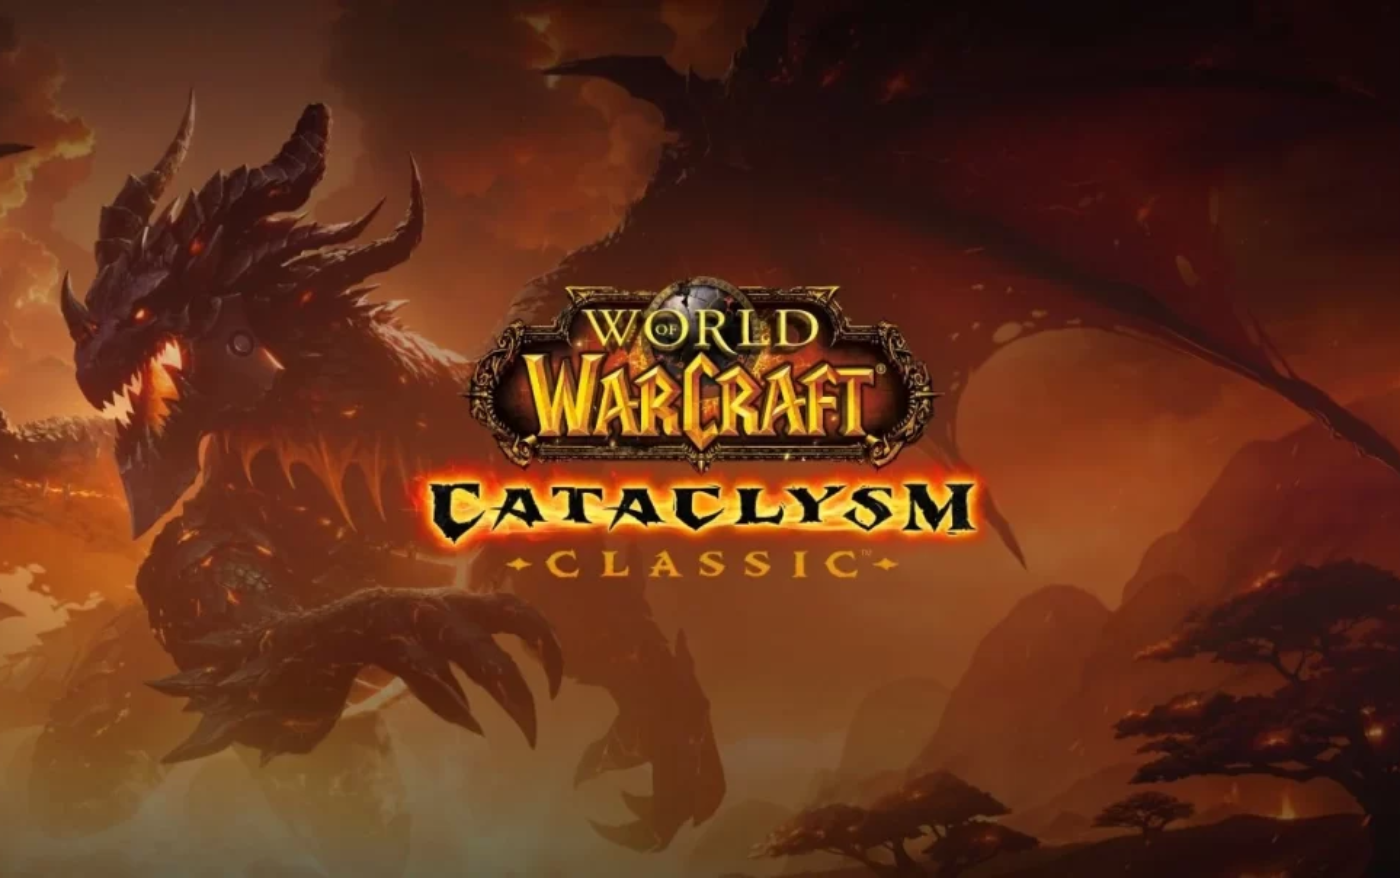 World of Warcraft: Cataclysm Boosting Service With MMOPILOT